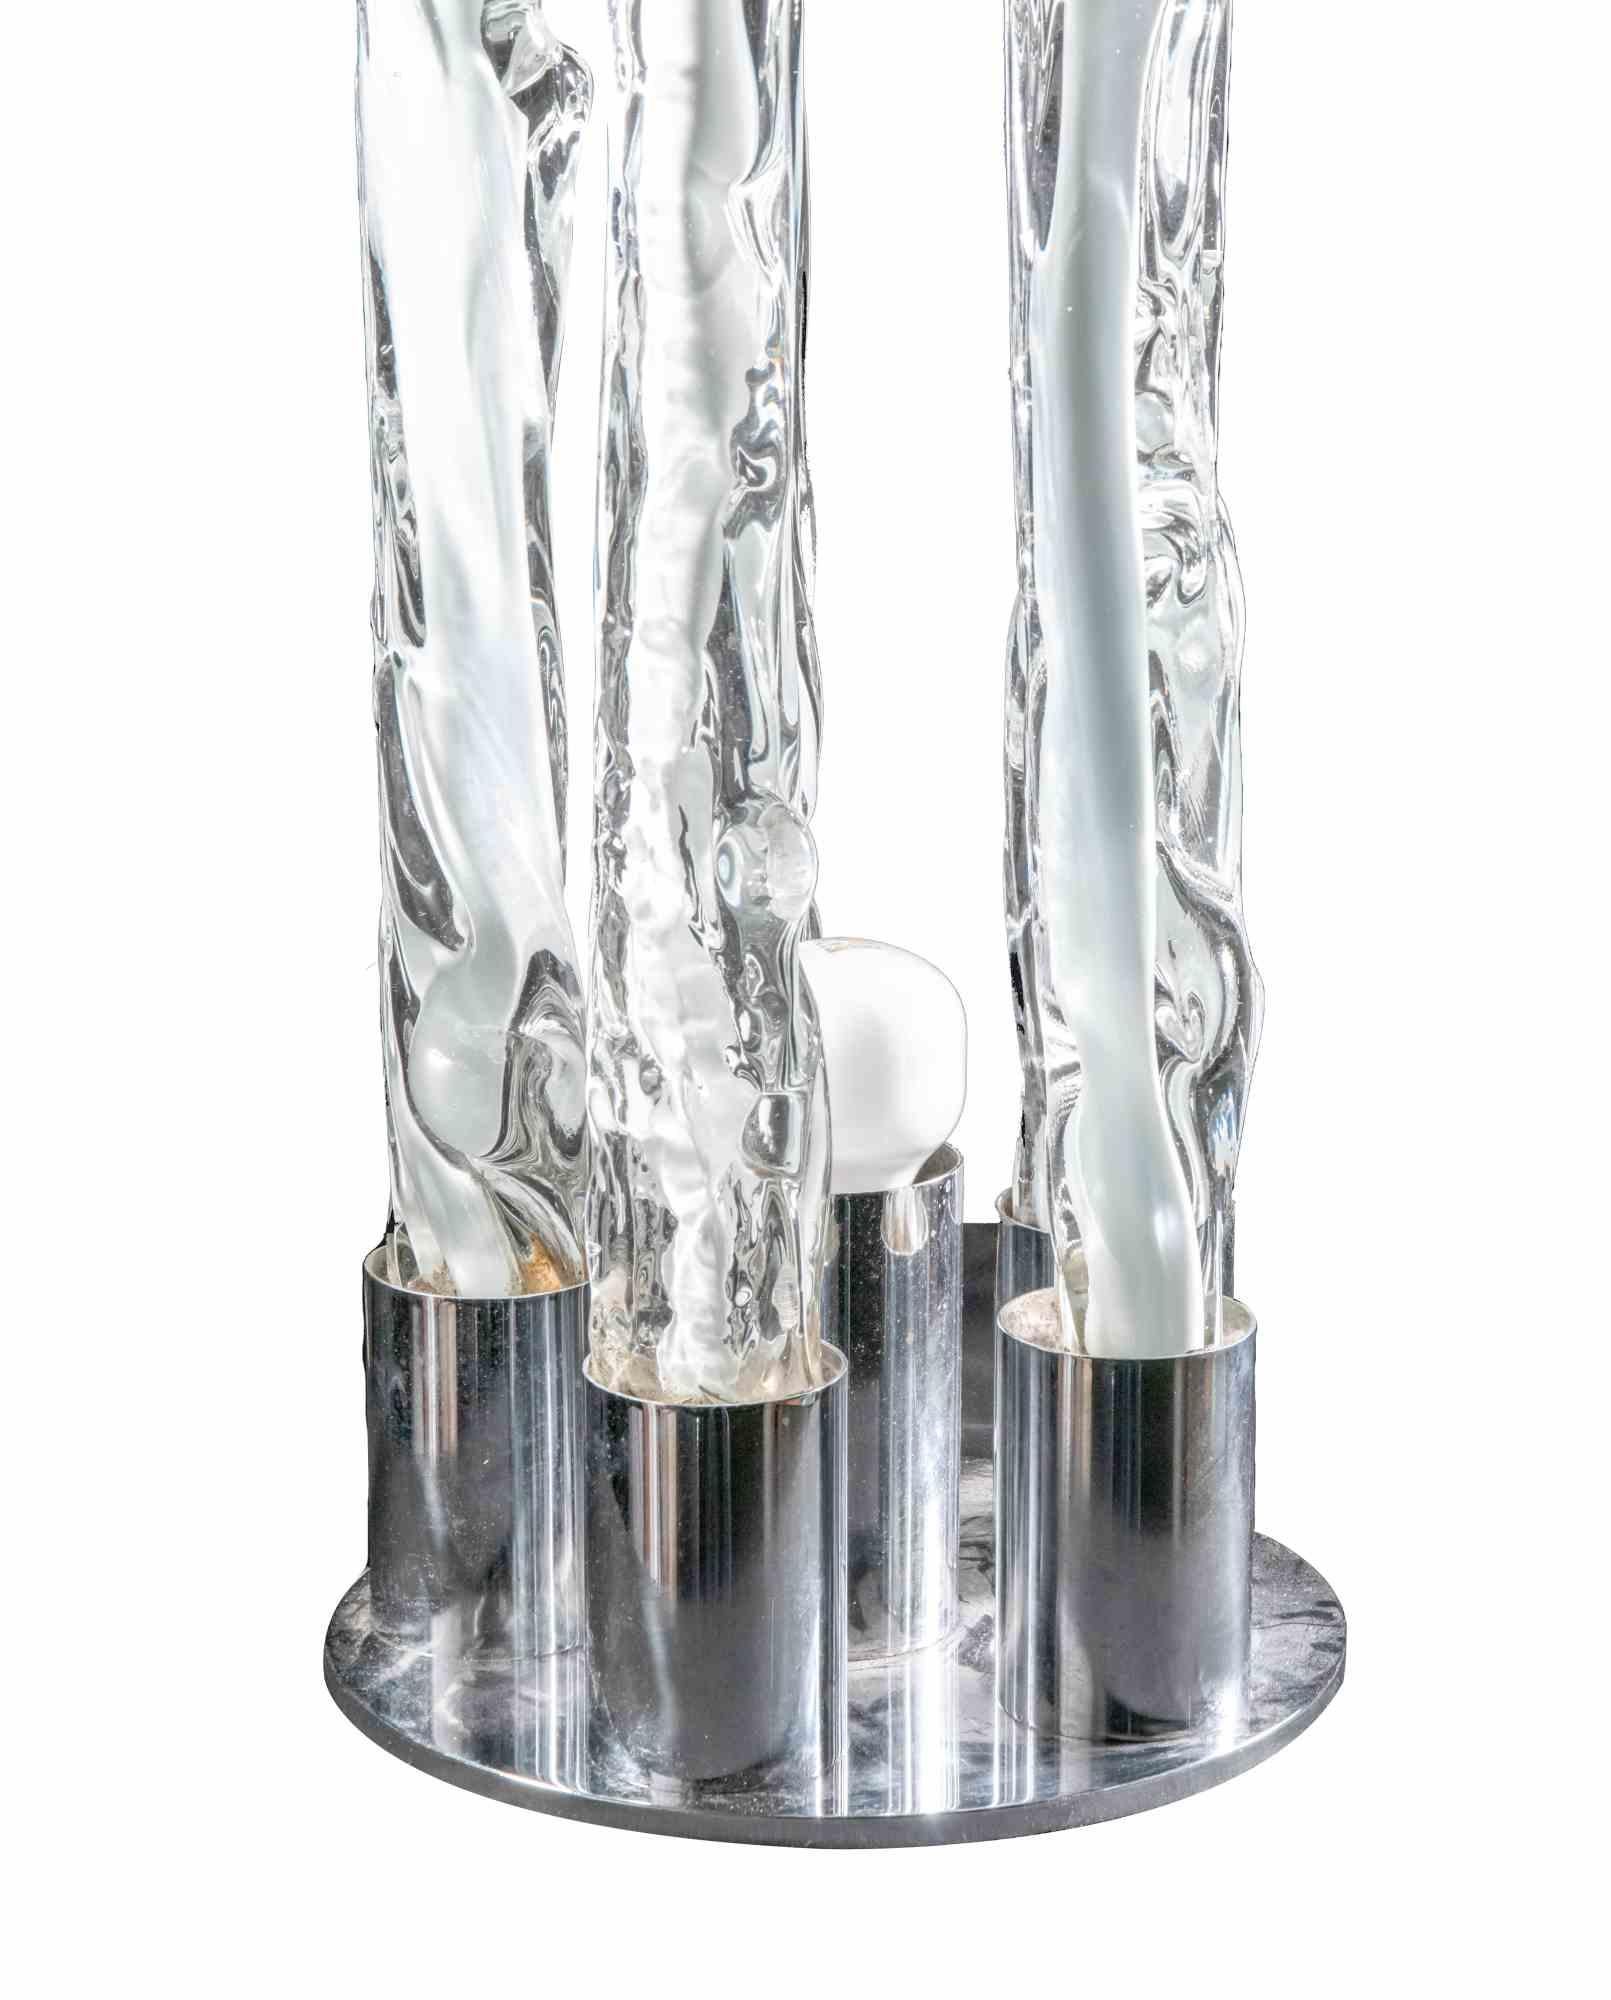 Art Glass Excalibur Lamp by Gino Poli for Ettore Fantasia, Italy, 1972